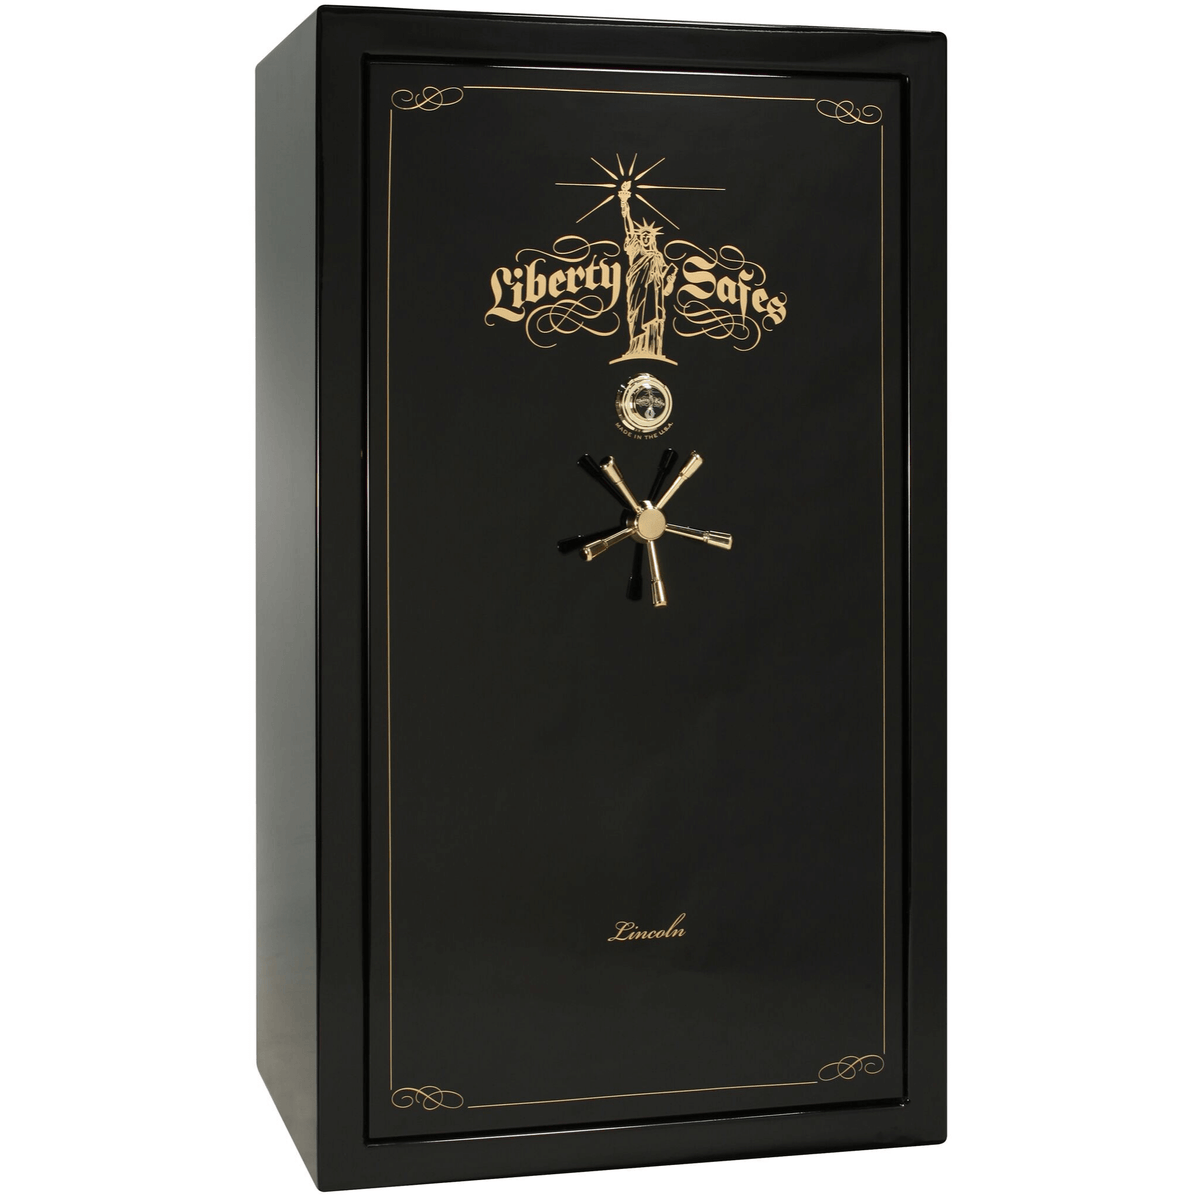 Liberty Lincoln 50 Safe in Black Gloss with Brass Mechanical Lock.